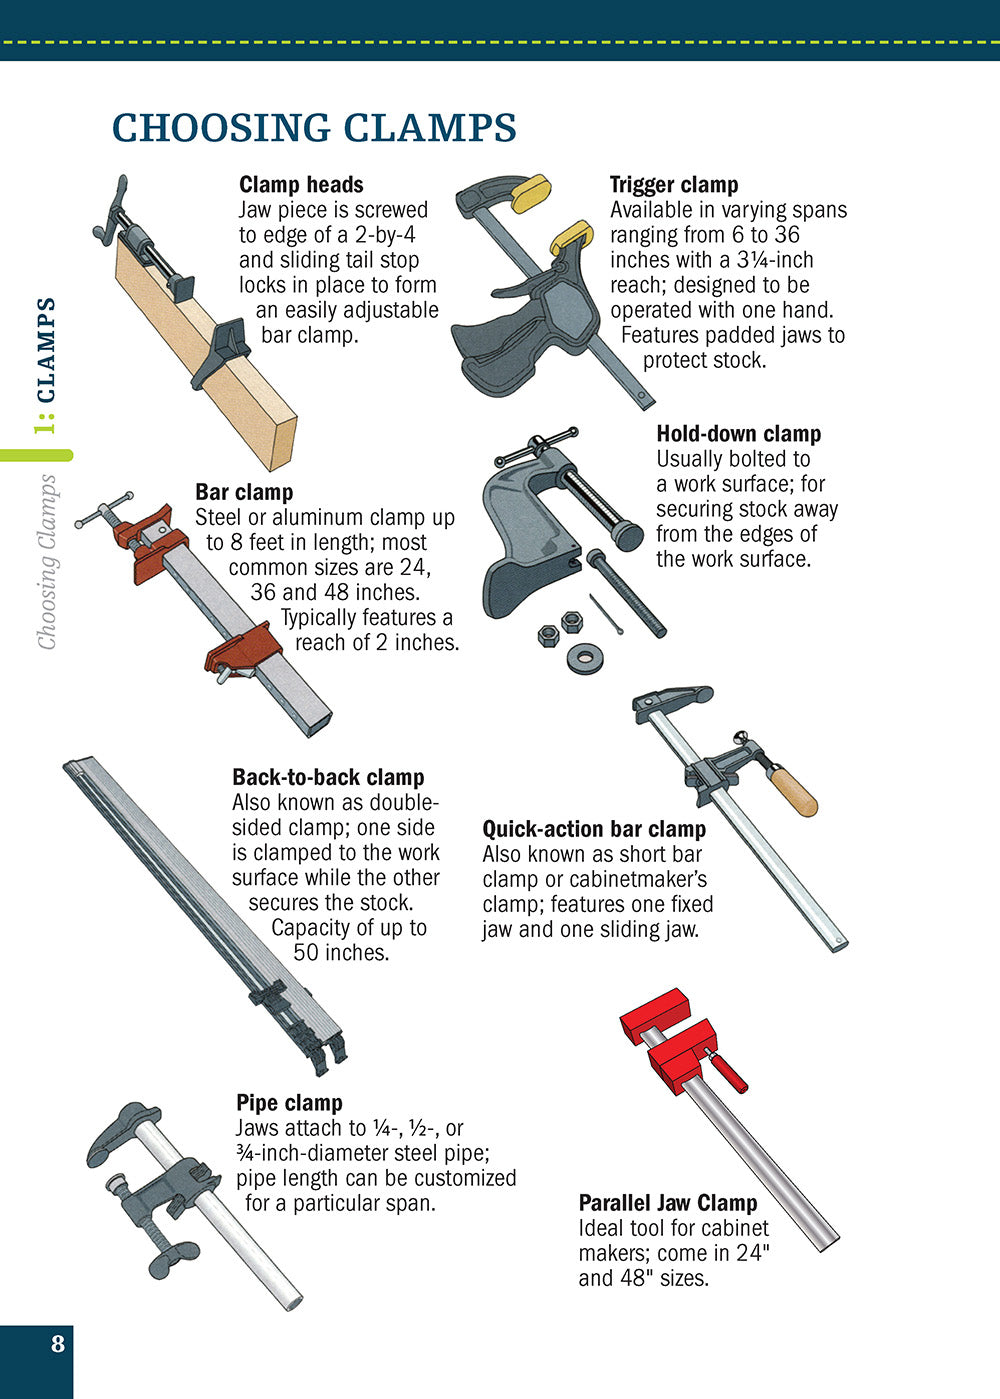 Glue and Clamps (Missing Shop Manual)